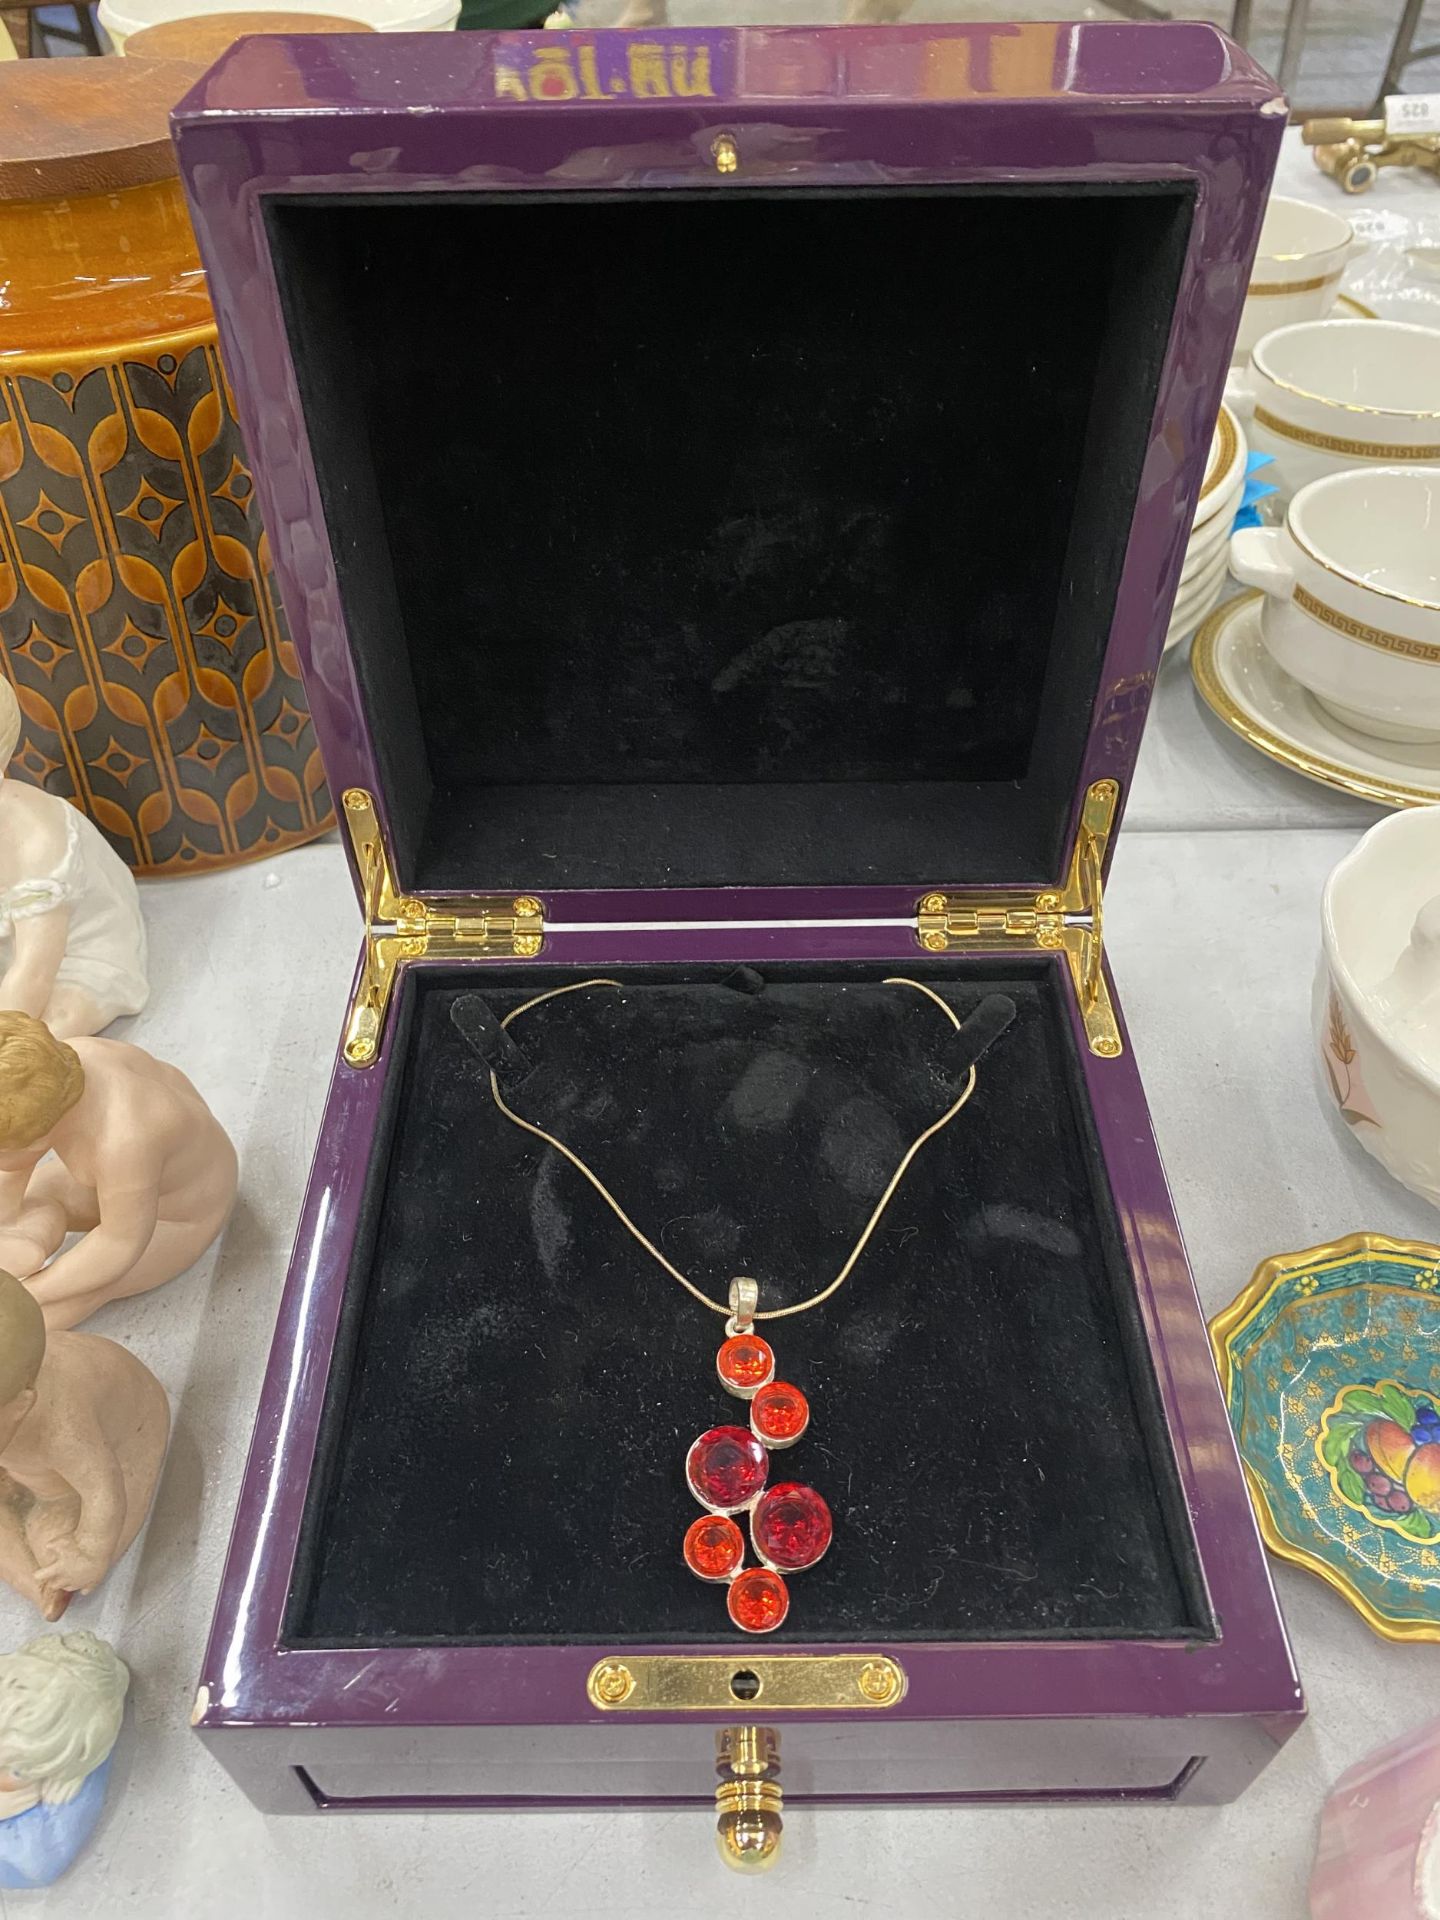 A NECKLACE WITH A LARGE 'CHERRY' DESIGN PENDANT IN PRESENTATION BOX